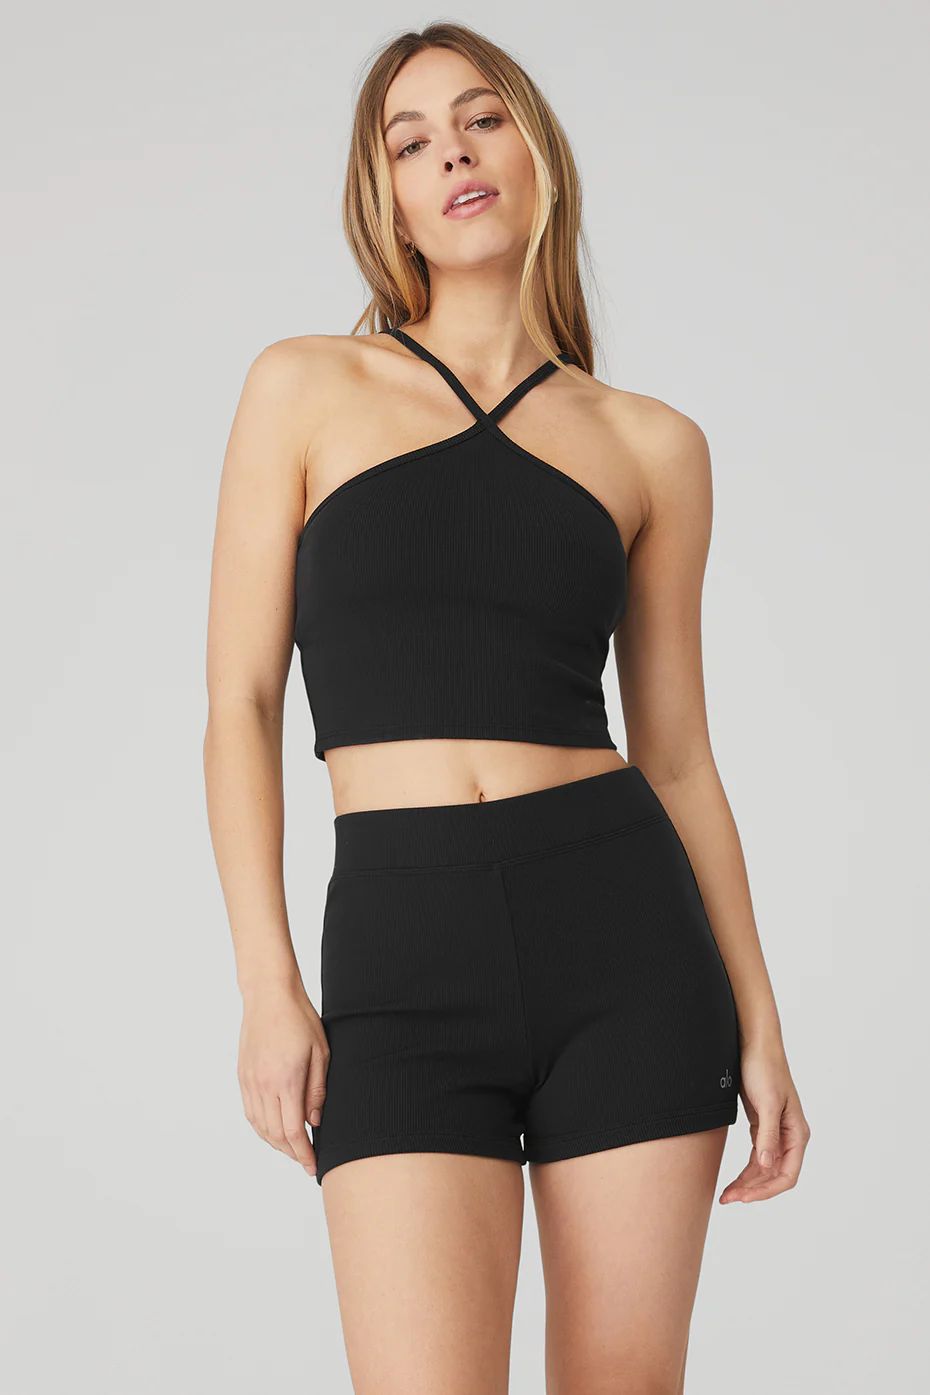 Alo YogaÂ® | Goddess Ribbed Cross Crop Top in Black, Size: XS | Alo Yoga